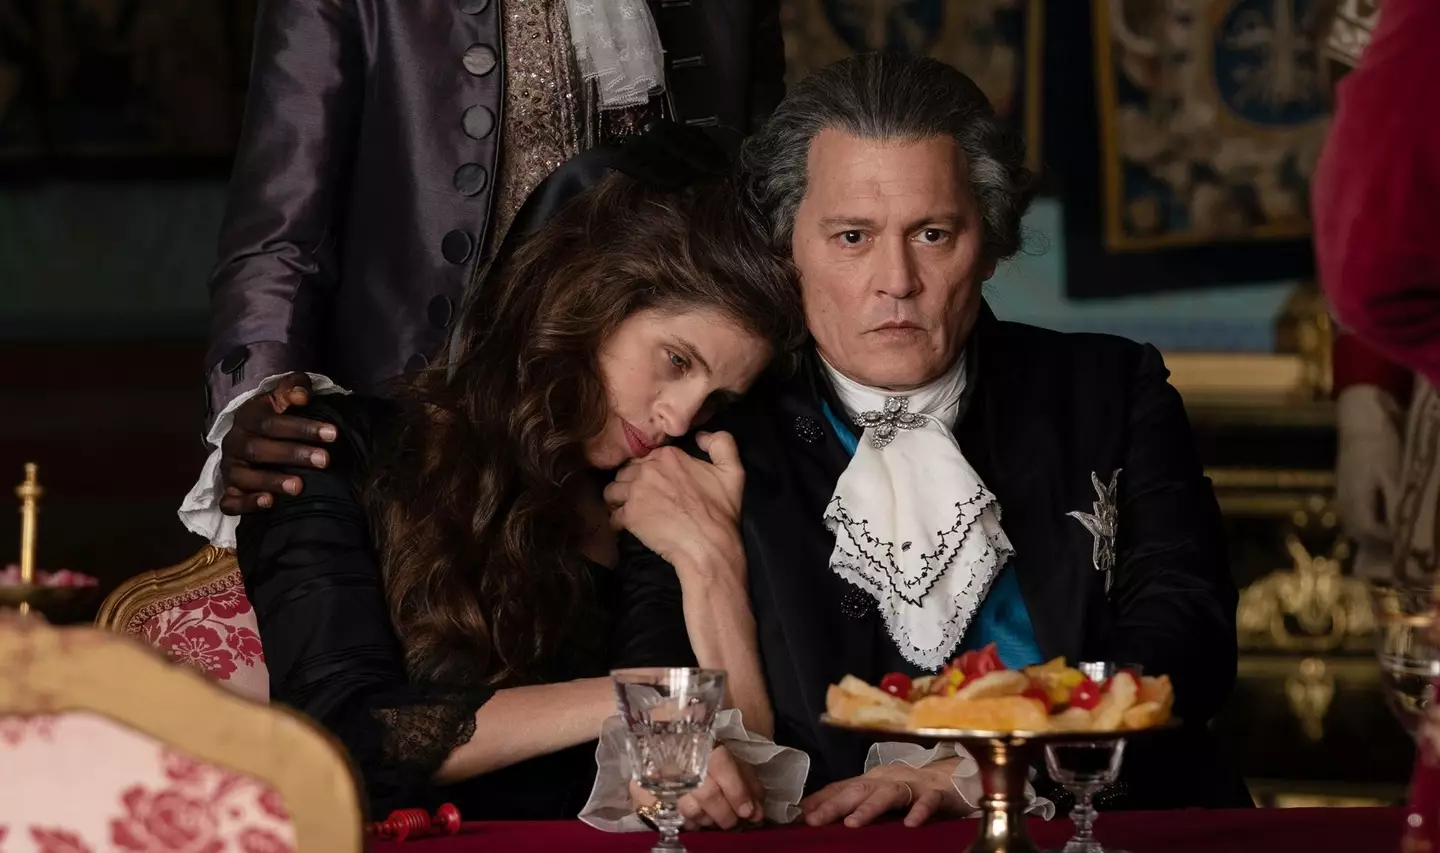 Johnny Depp's new film has received rave reviews at Cannes Film Festival.